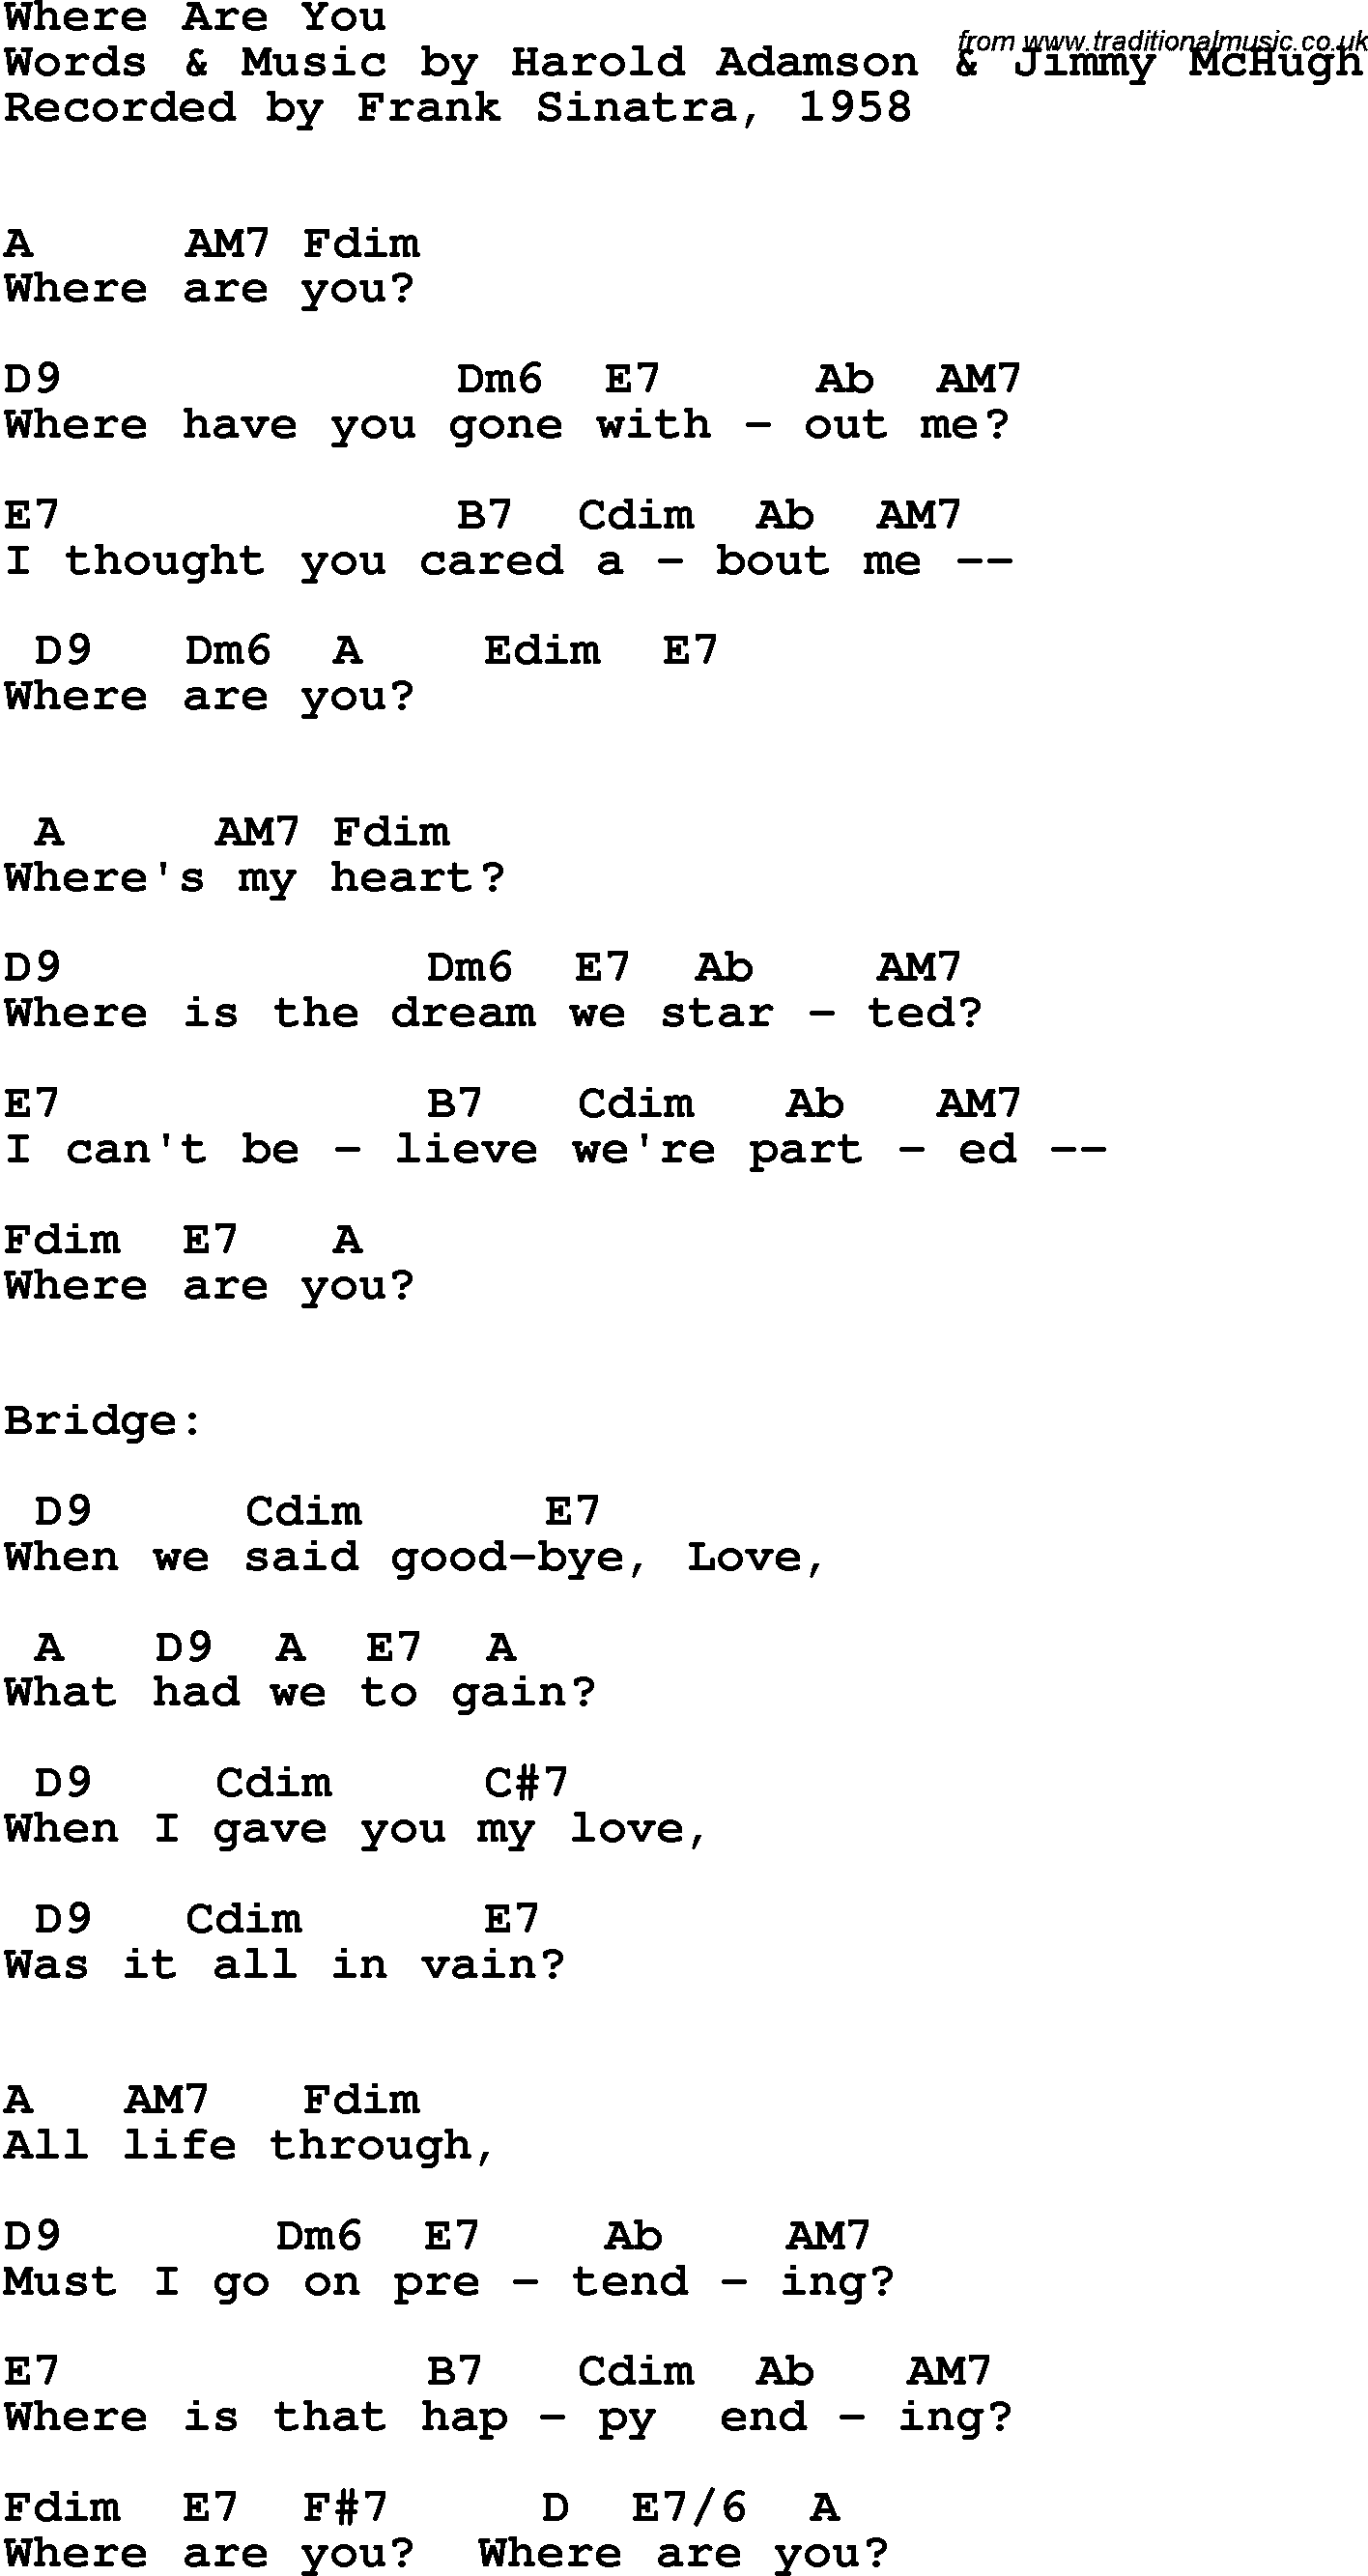 Song Lyrics with guitar chords for Where Are You - Frank Sinatra, 1958